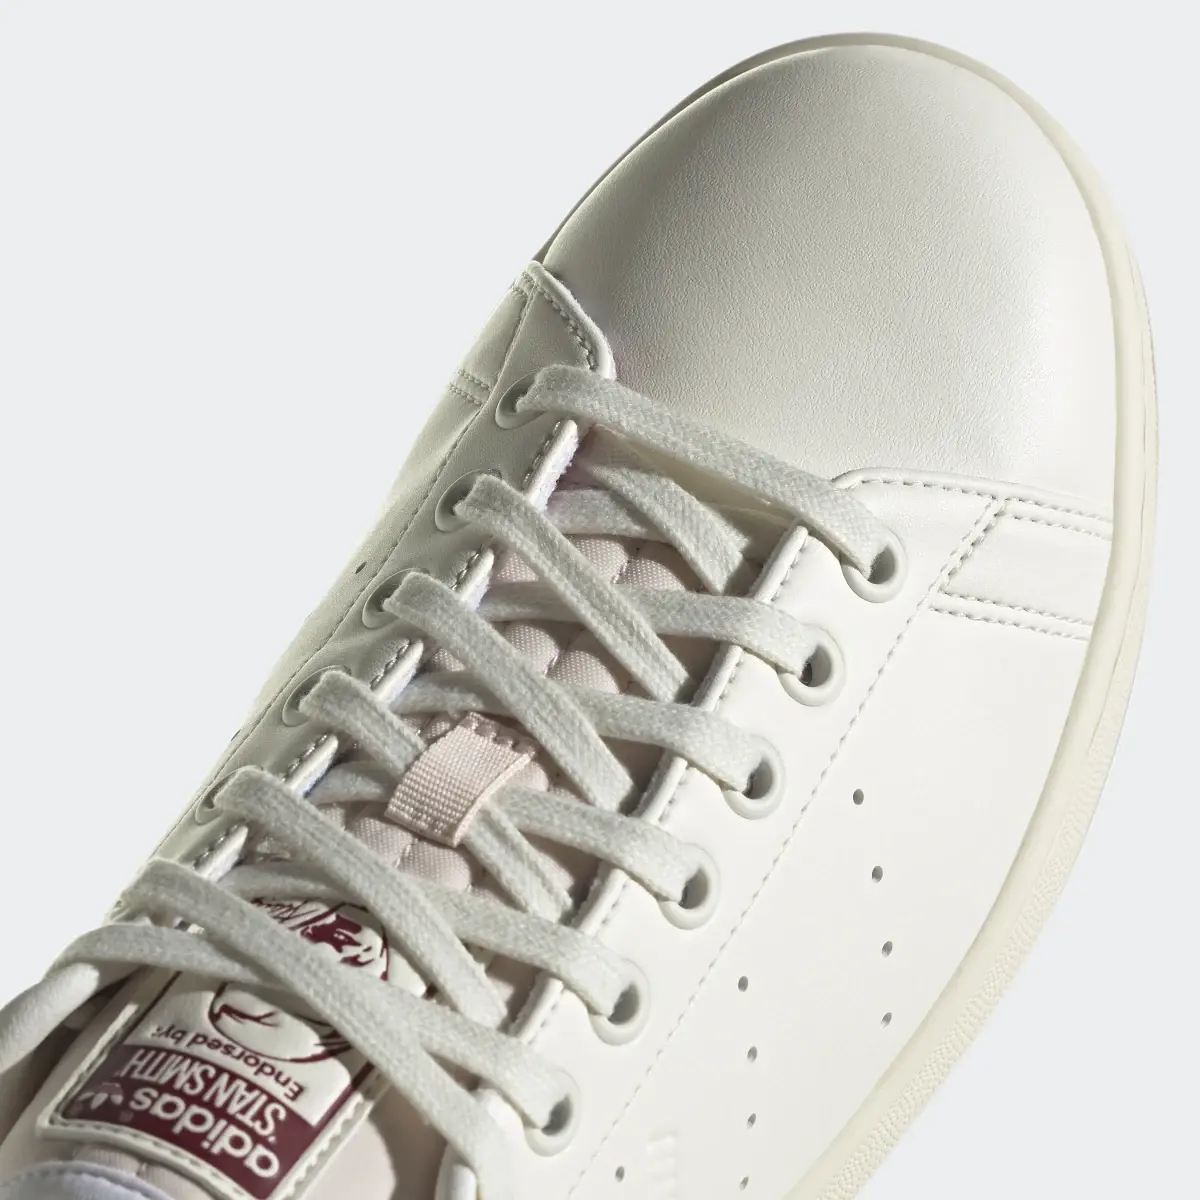 Adidas Stanniversary Stan Smith Shoes. 3